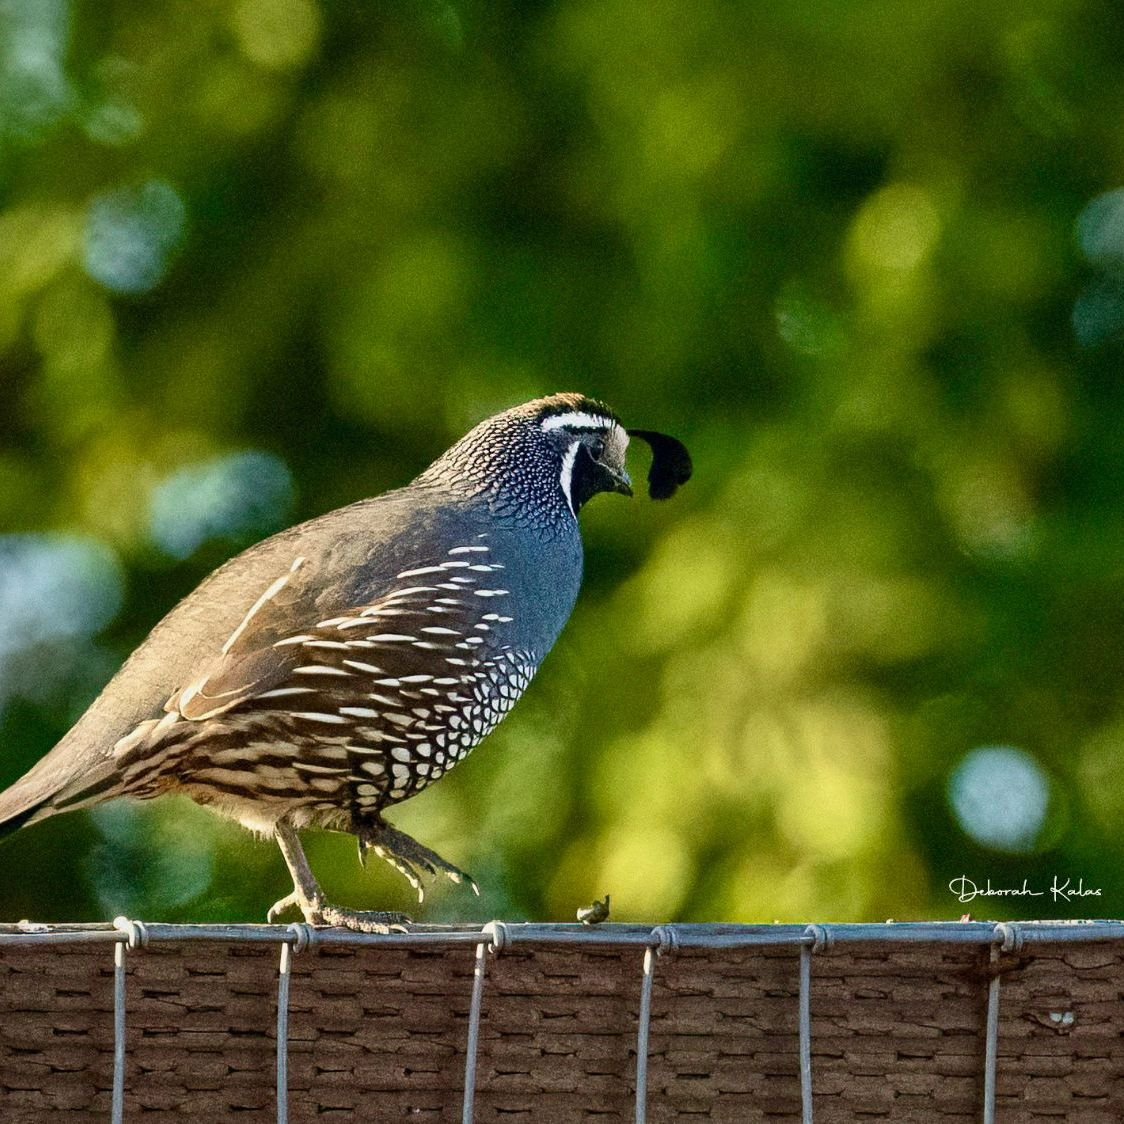 It's springtime and we have lots of bird activity here at the farm. I love the detail on this #quail photographed by @dkalas_art 
The farm will be OPEN Friday and Sunday. We are closed on Saturday, May 4th.
#californiacentralcoast #lavenderfarm #bird